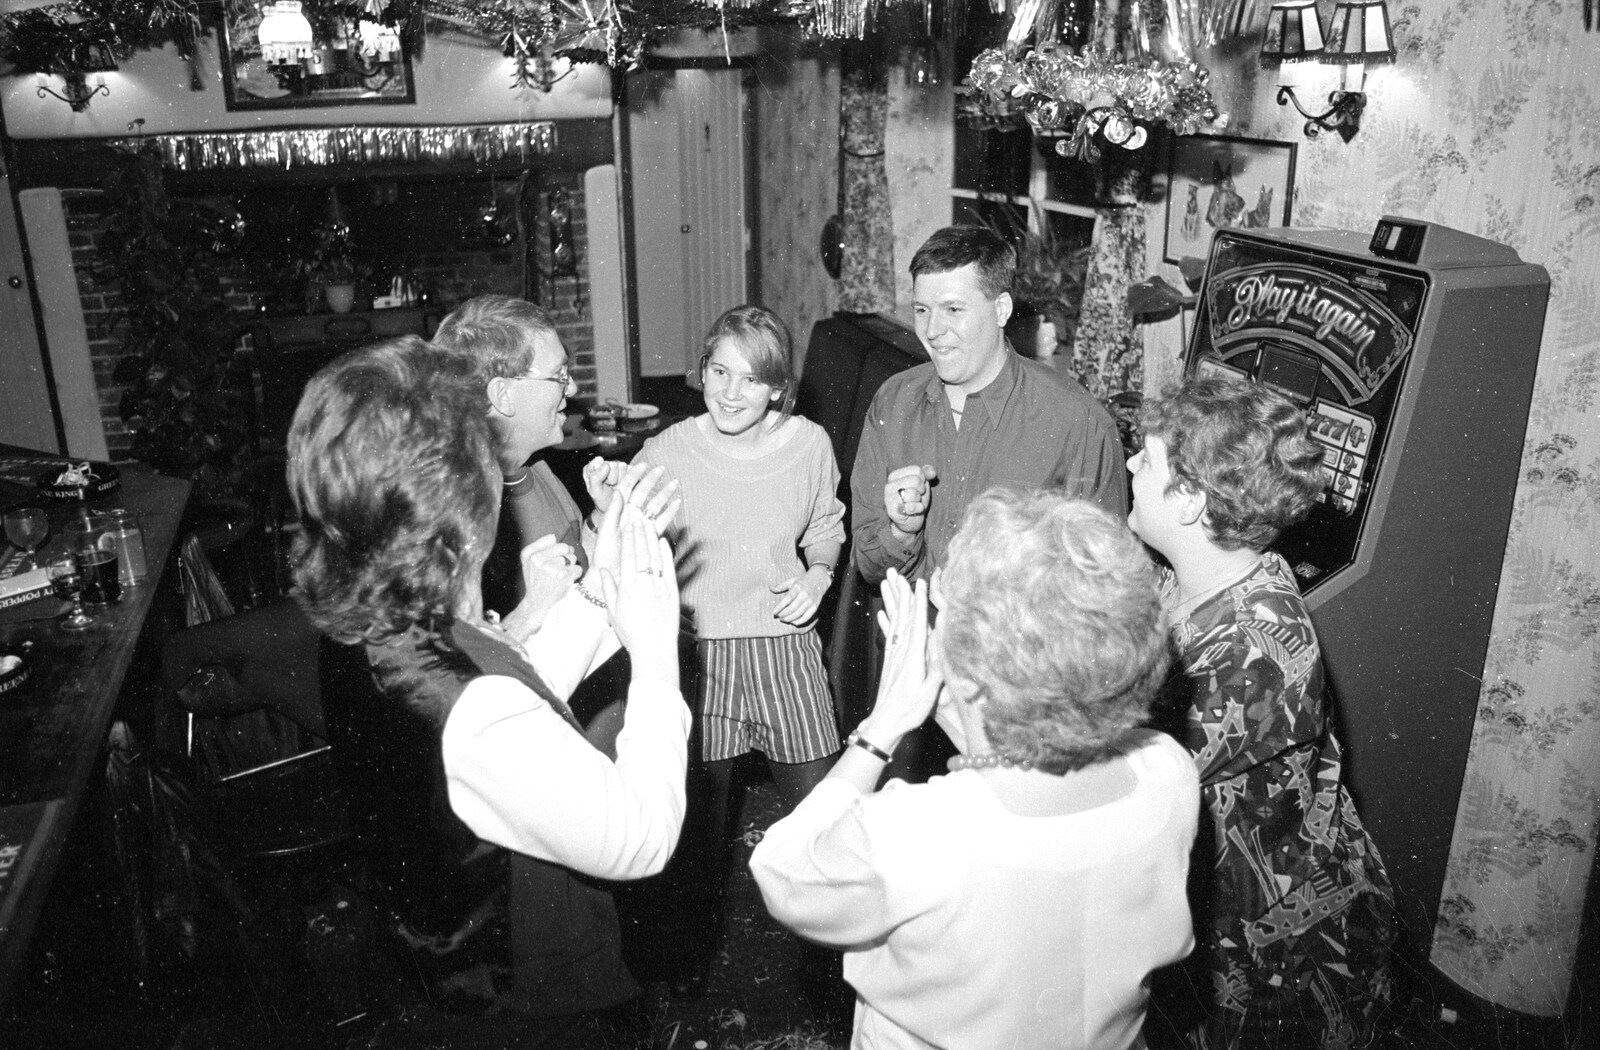 A dancing circle from New Year's Eve at the Swan Inn, Brome, Suffolk - 31st December 1992